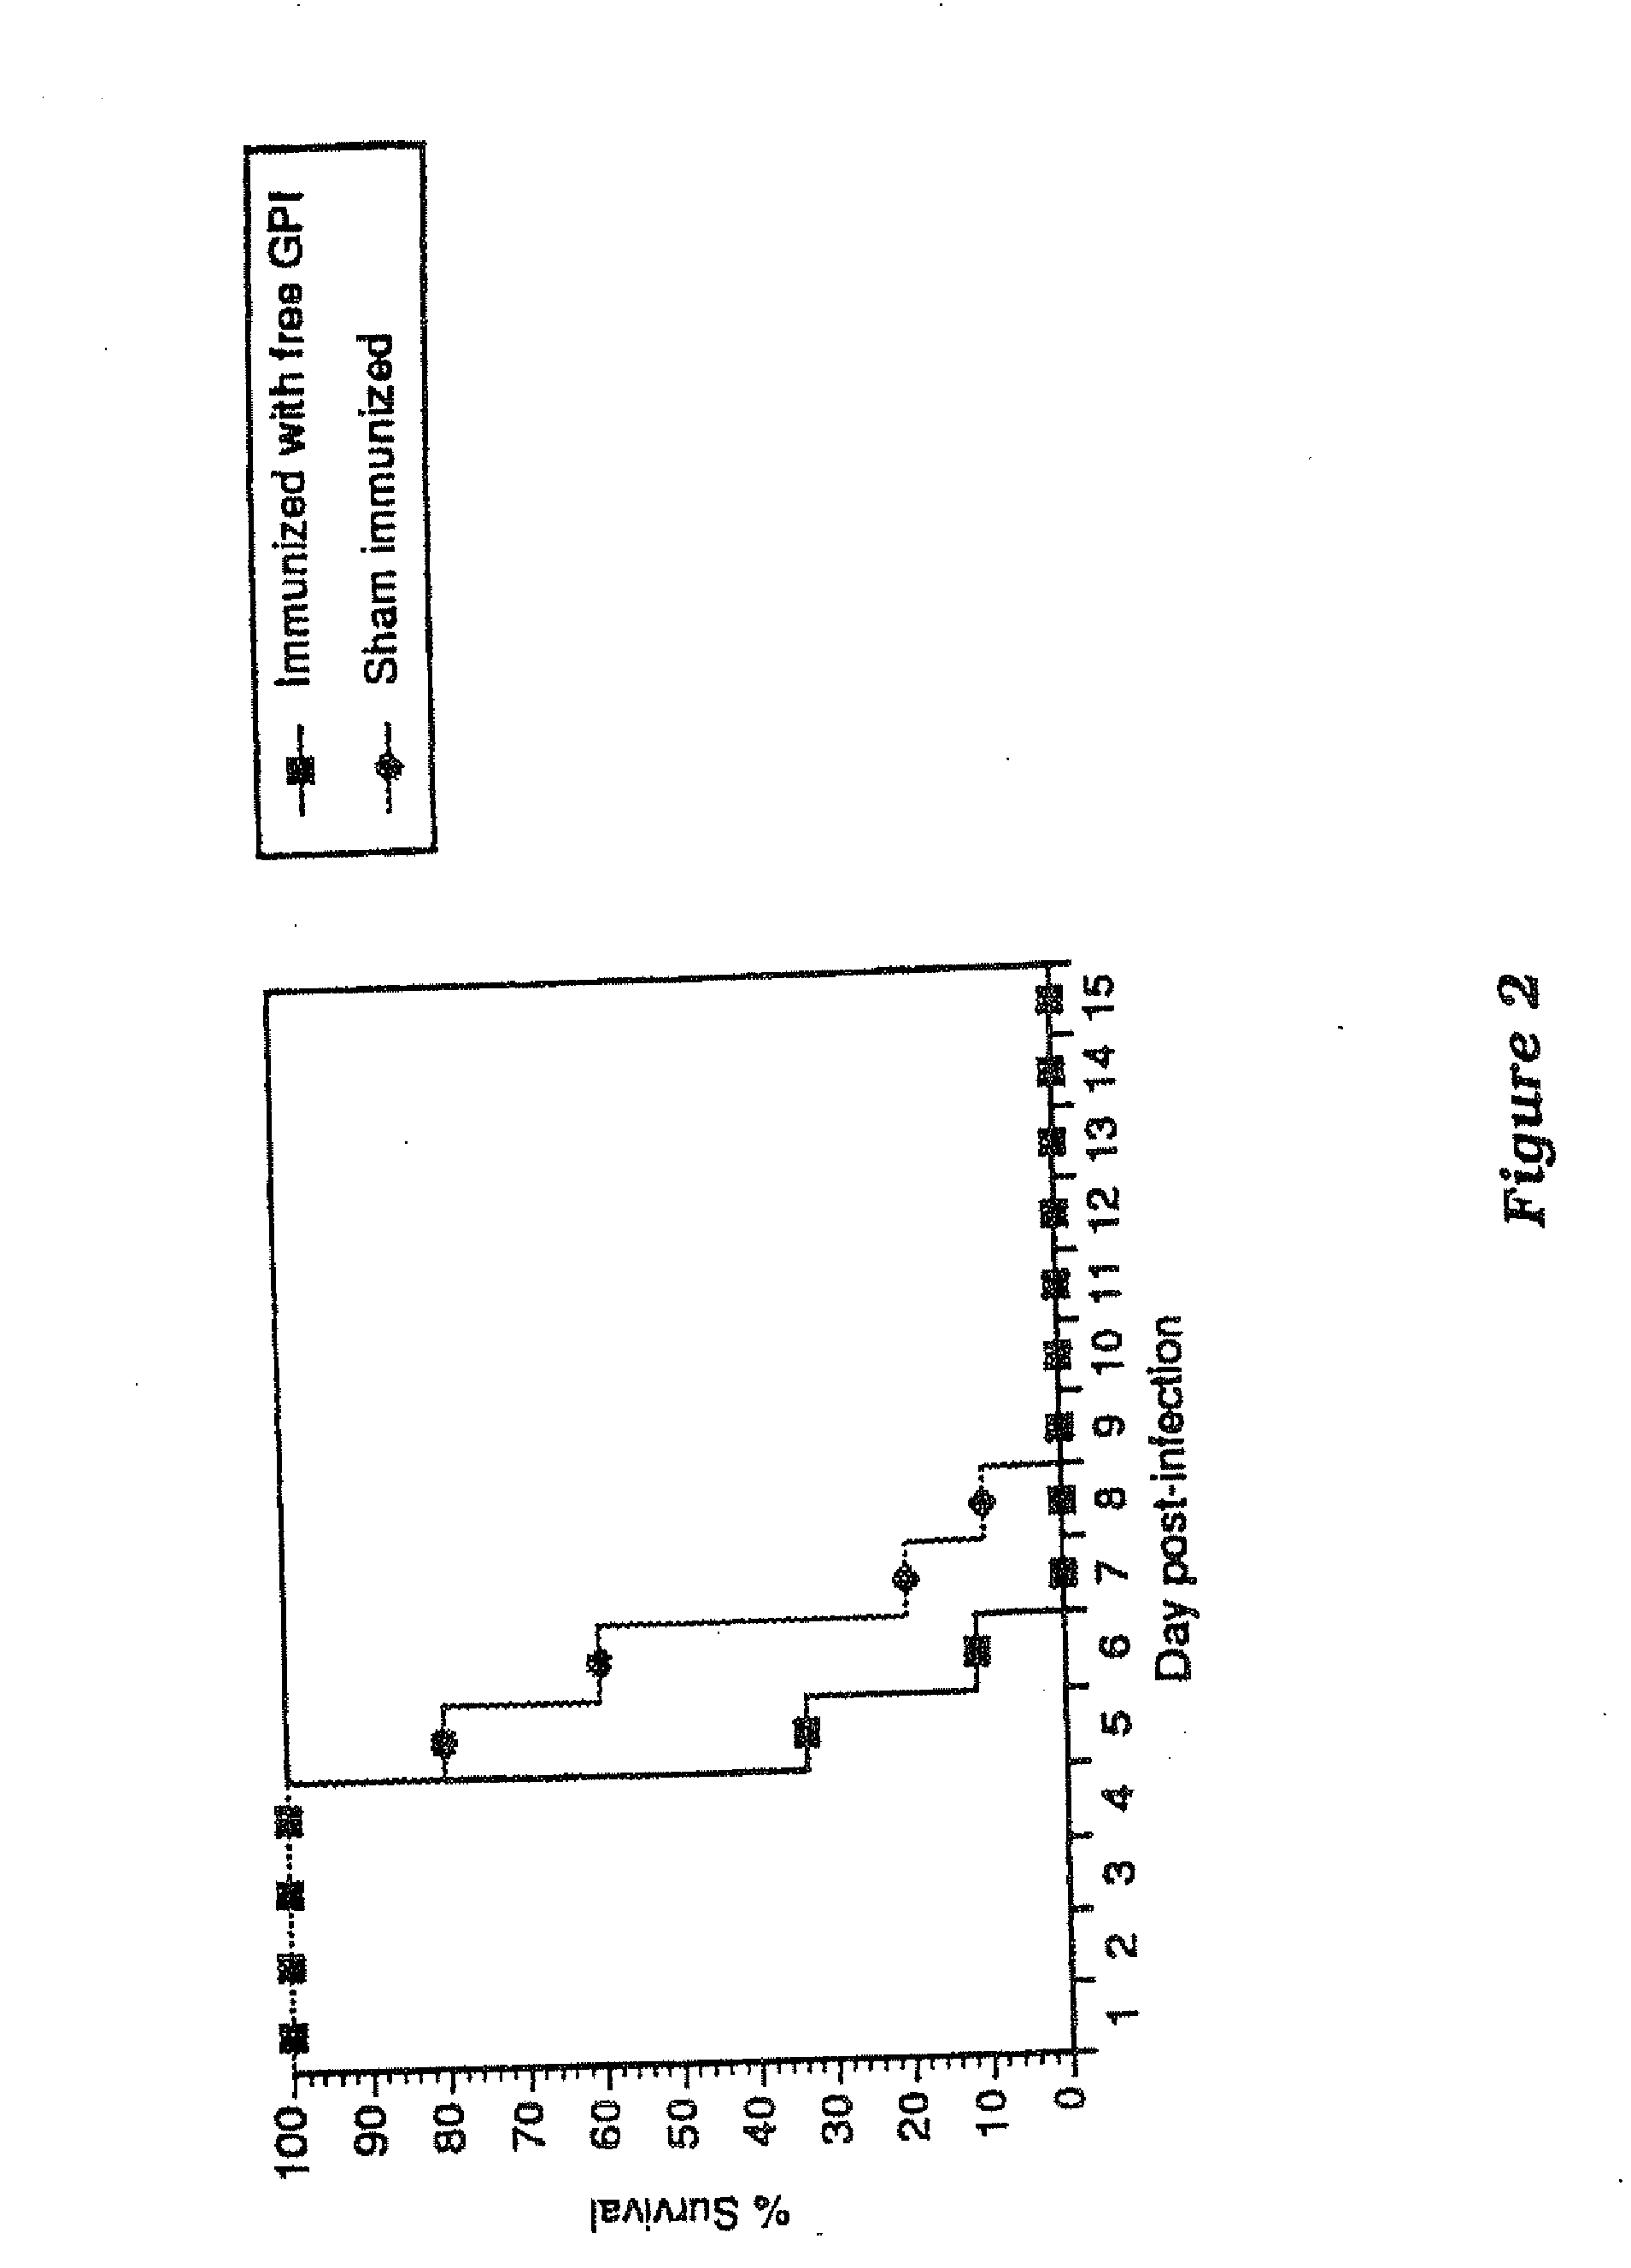 Immunogenic compositions and uses thereof